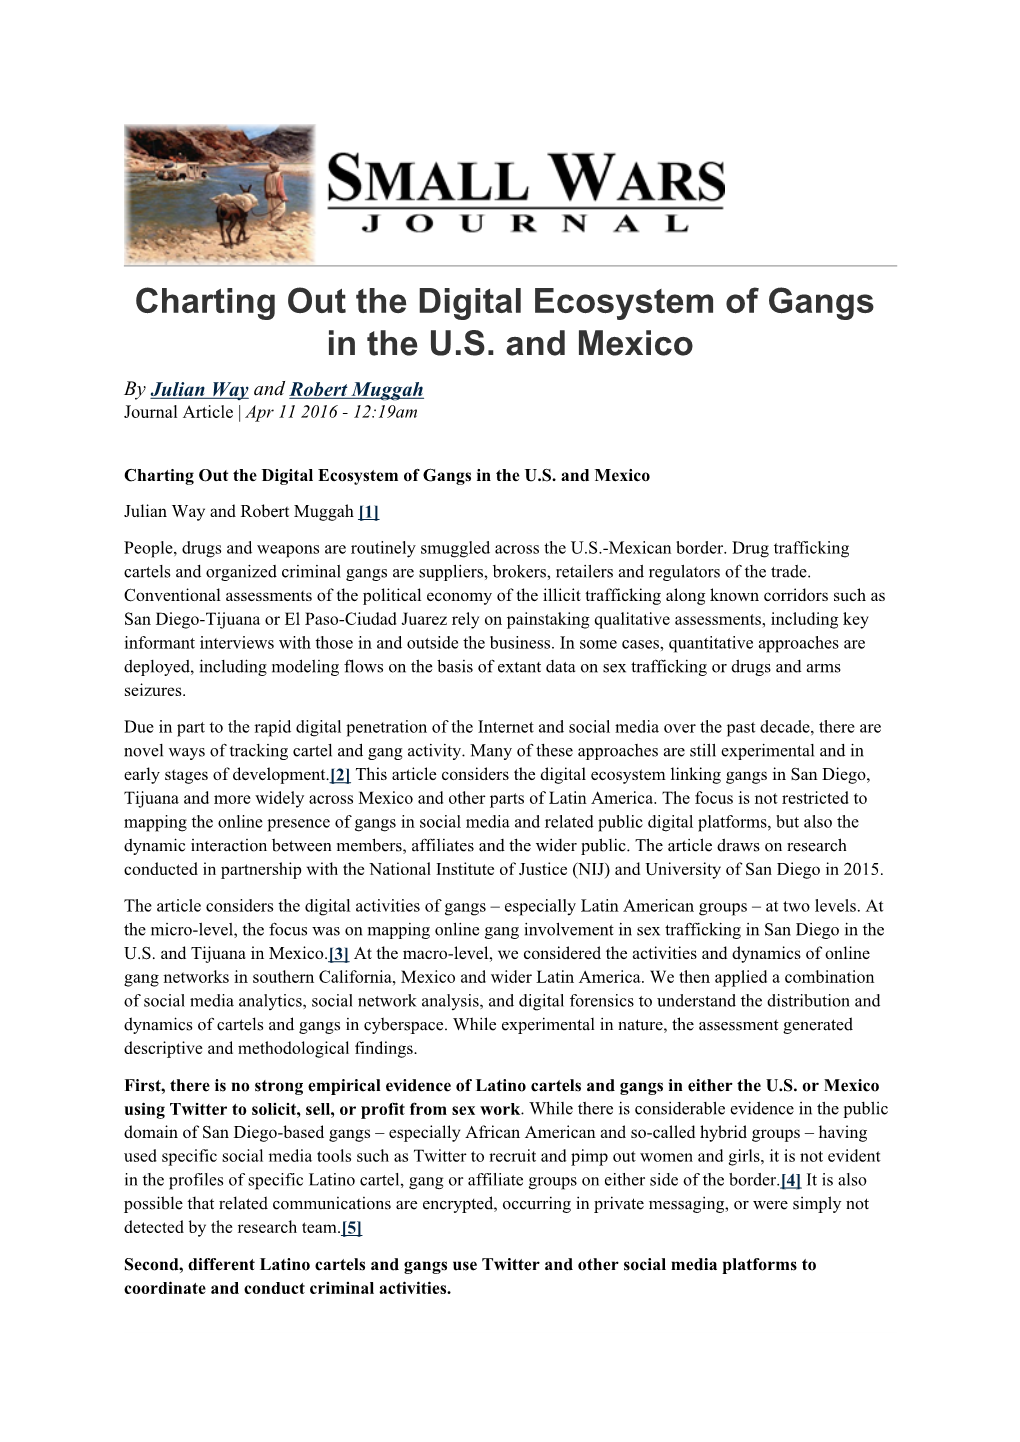 Charting out the Digital Ecosystem of Gangs in the U.S